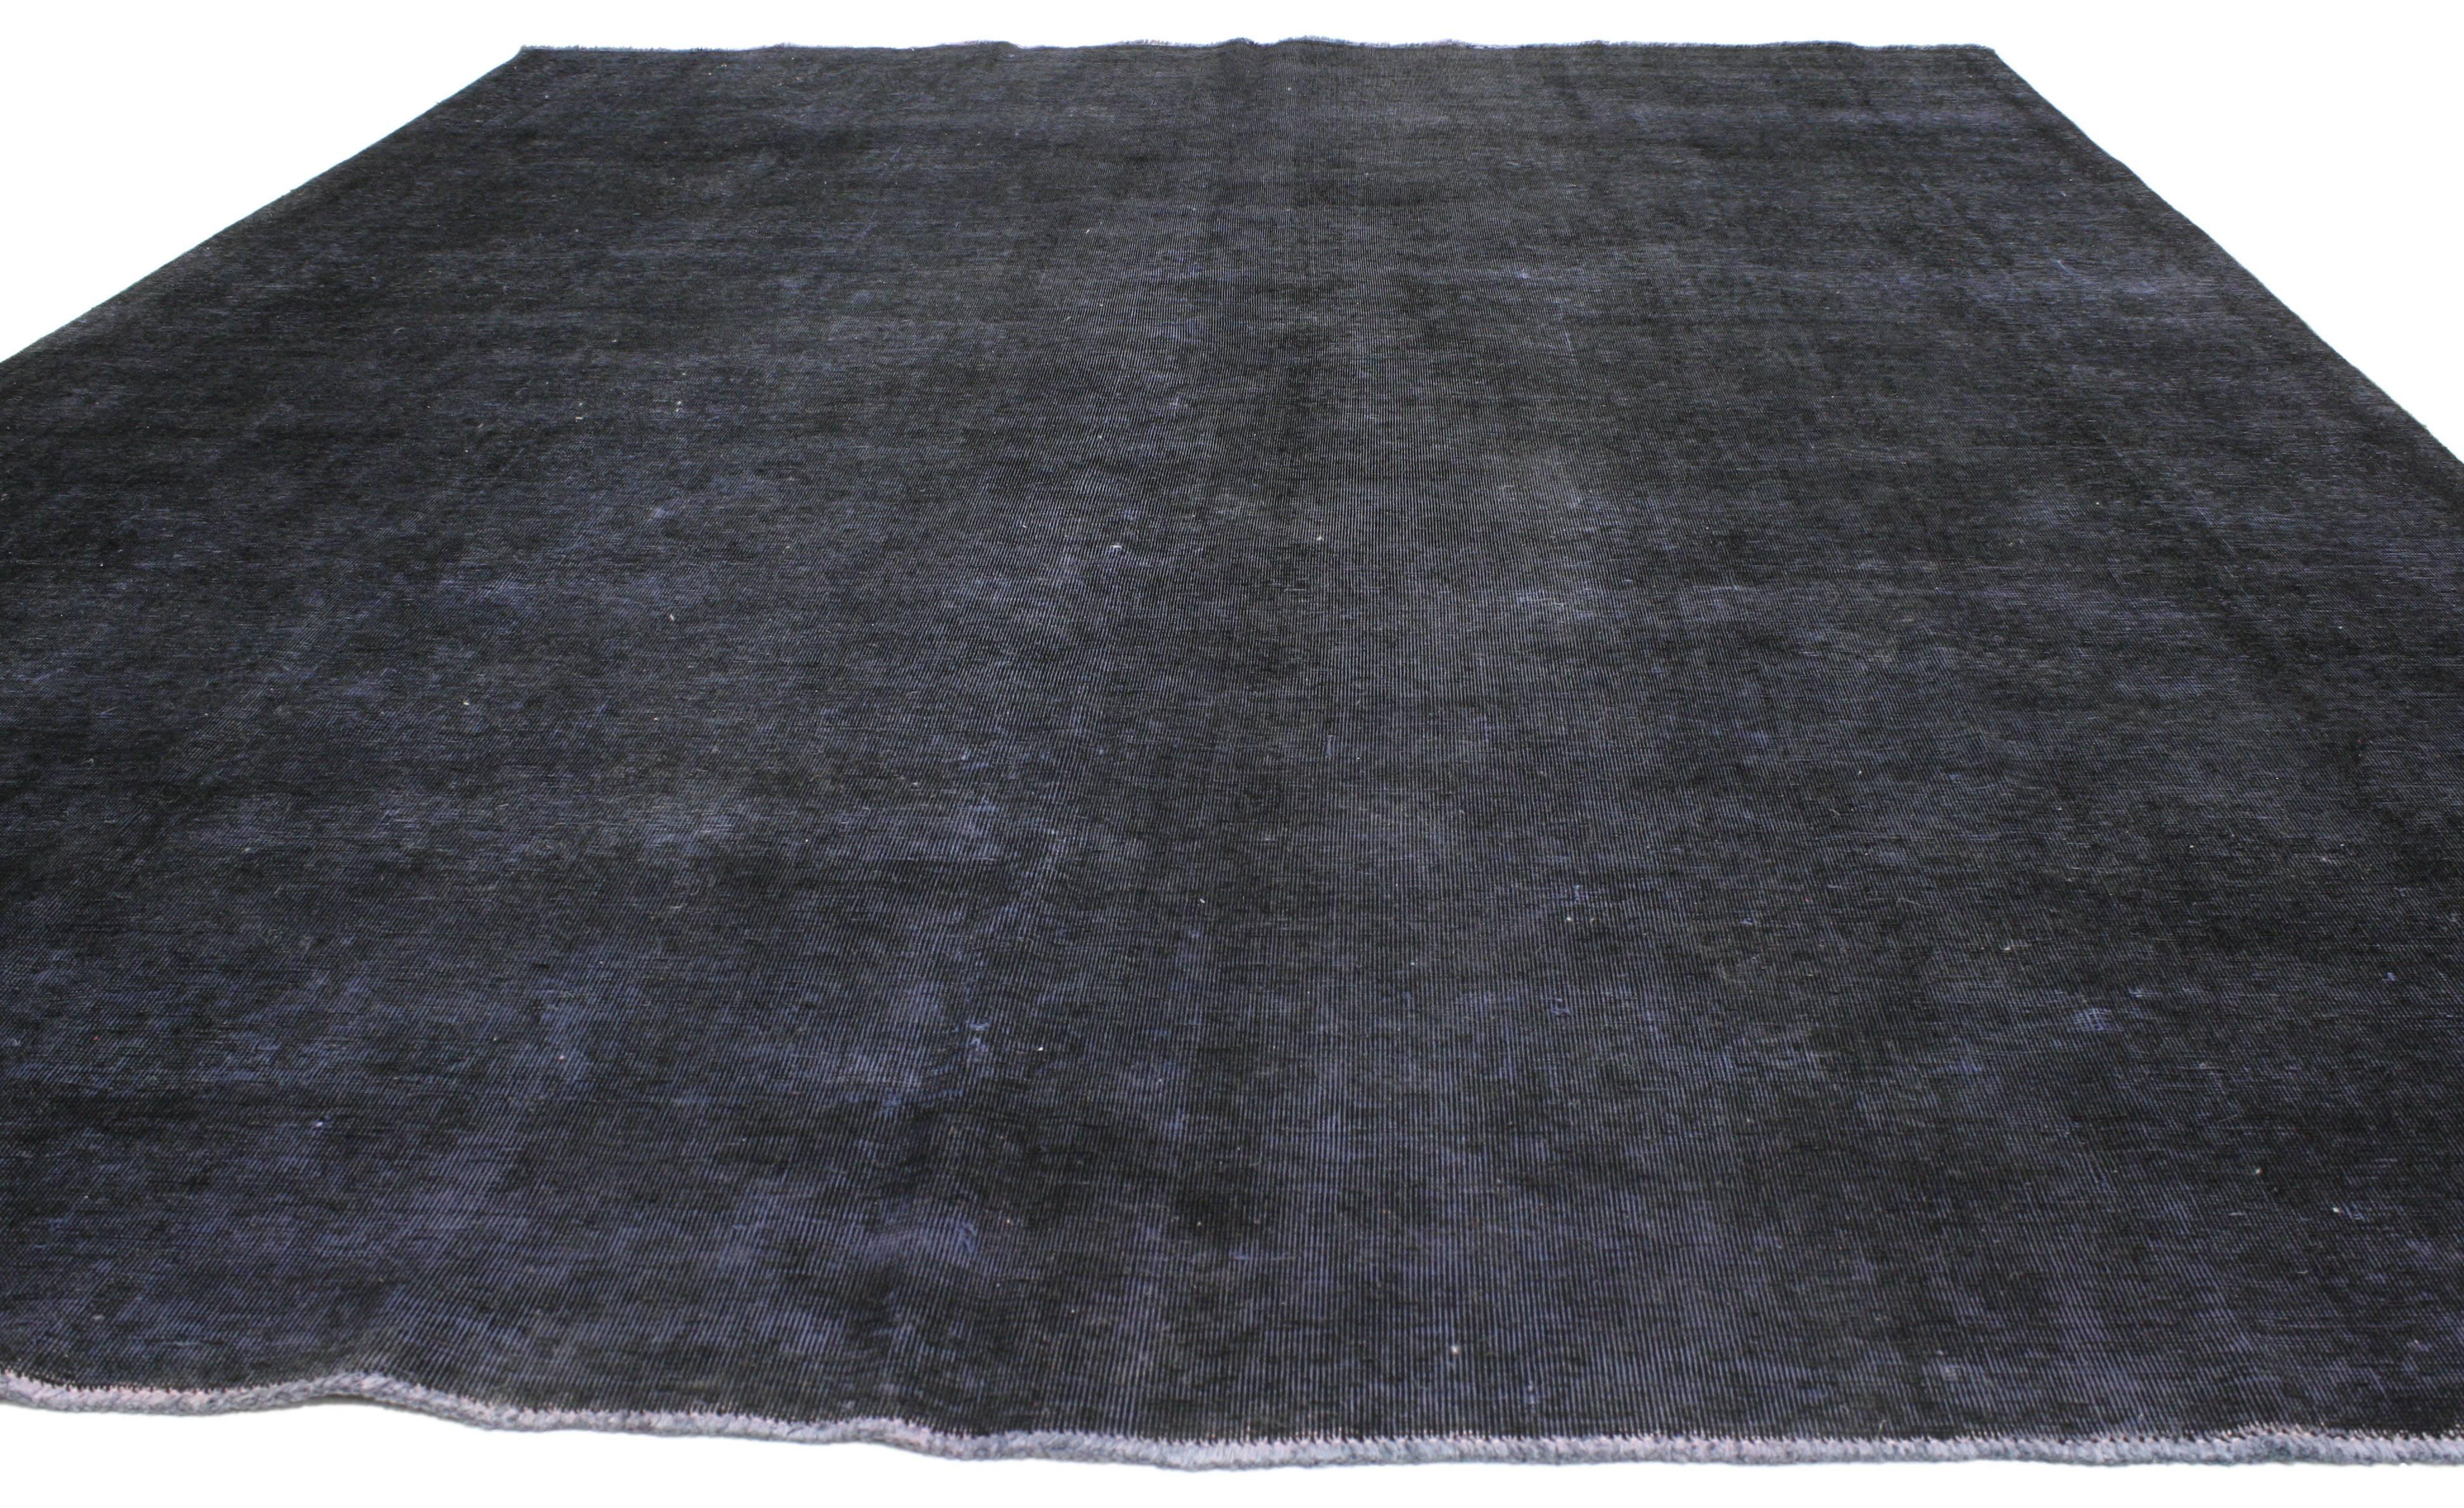 Hand-Knotted Distressed Vintage Overdyed Persian Rug with Luxe Steampunk Industrial Style